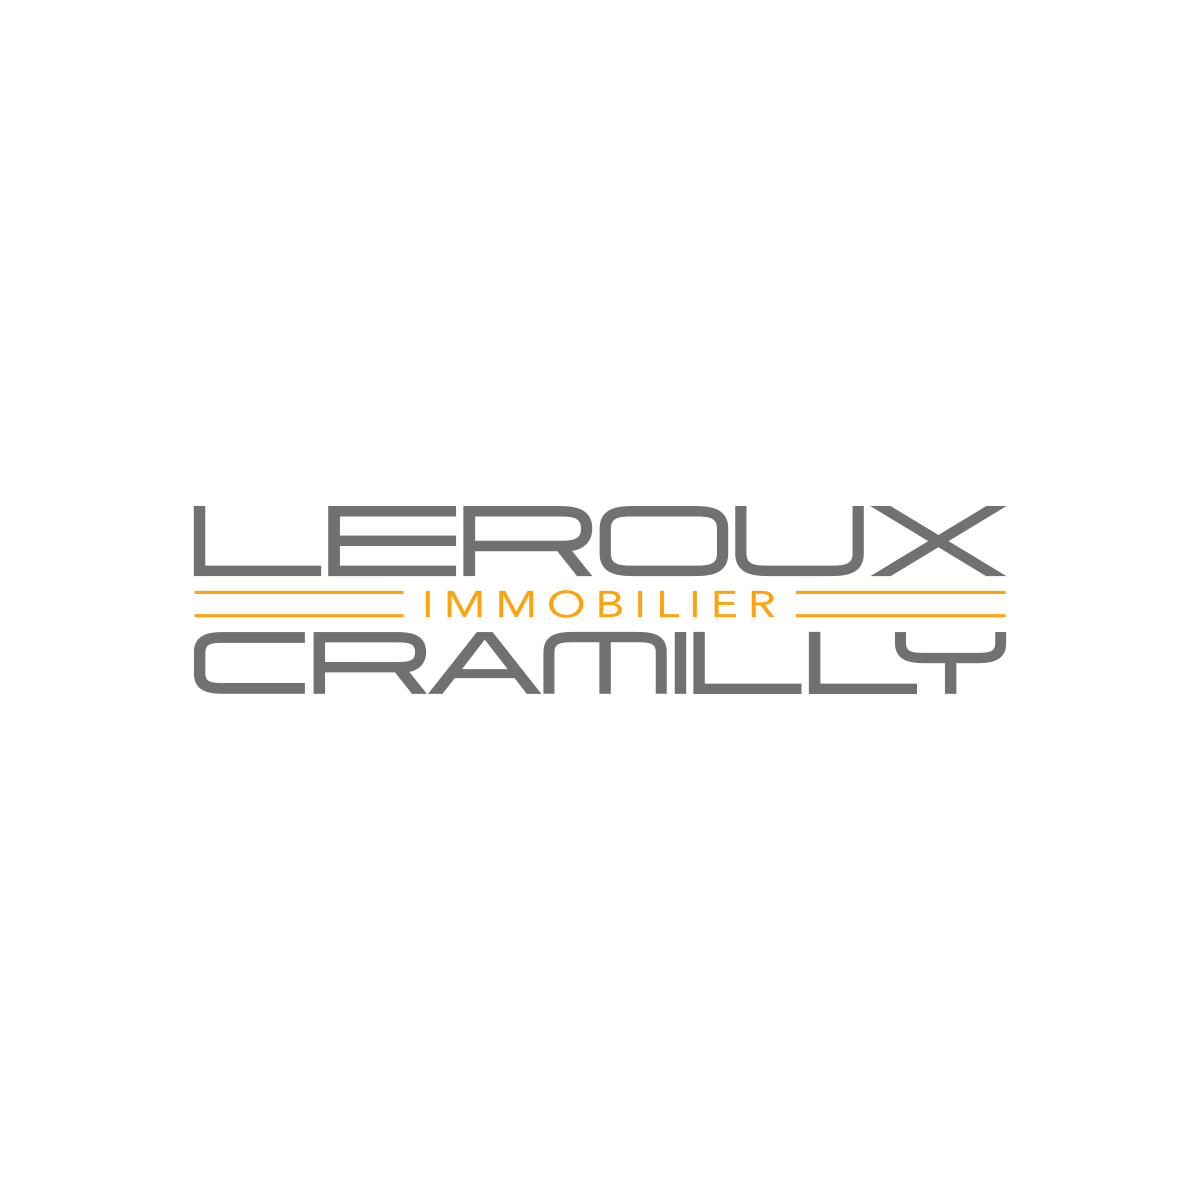 Agence immobiliere Leroux Cramilly Immobilier